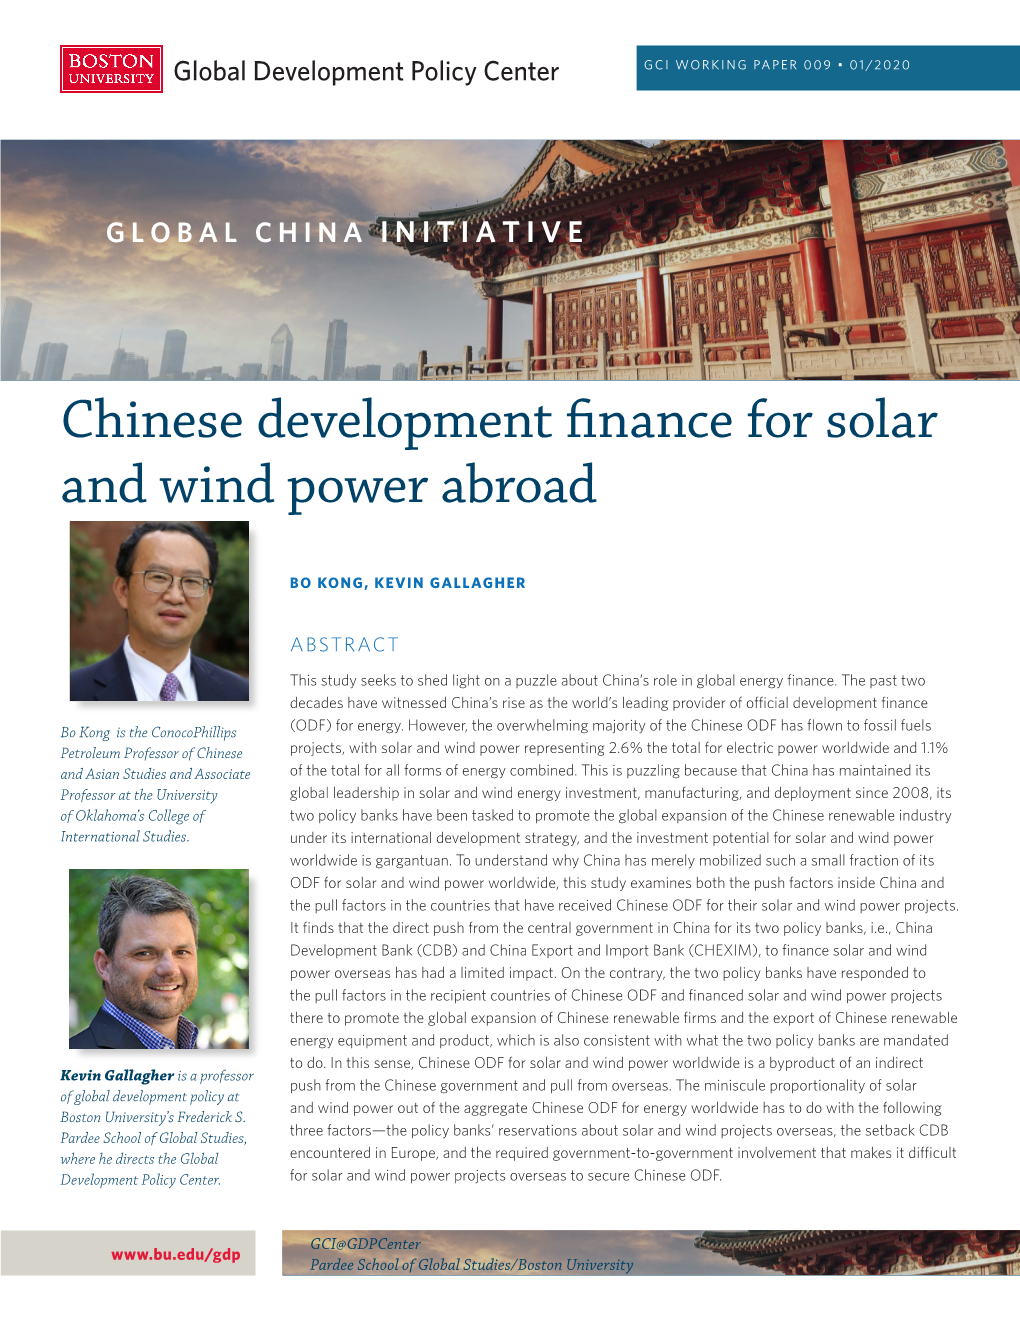 Chinese Development Finance for Solar and Wind Power Abroad